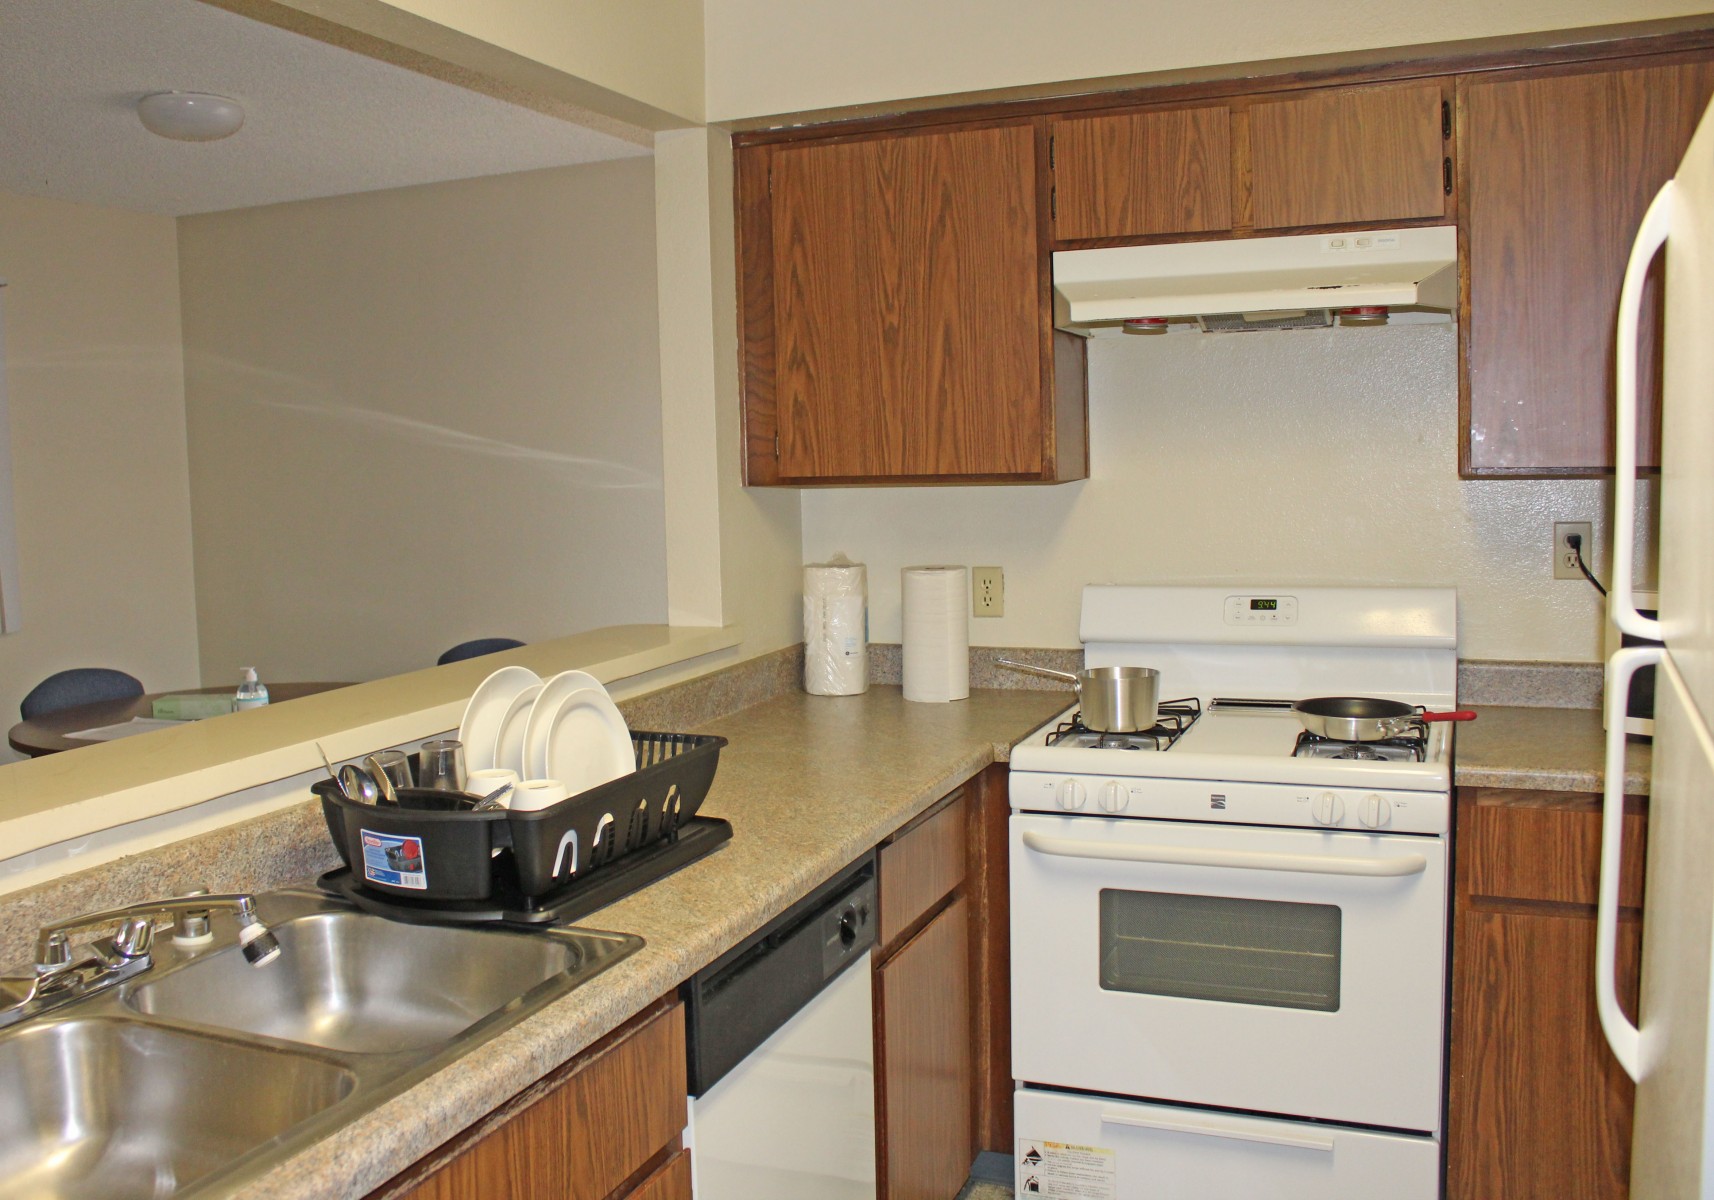 View of kitchen stove, sink and counters